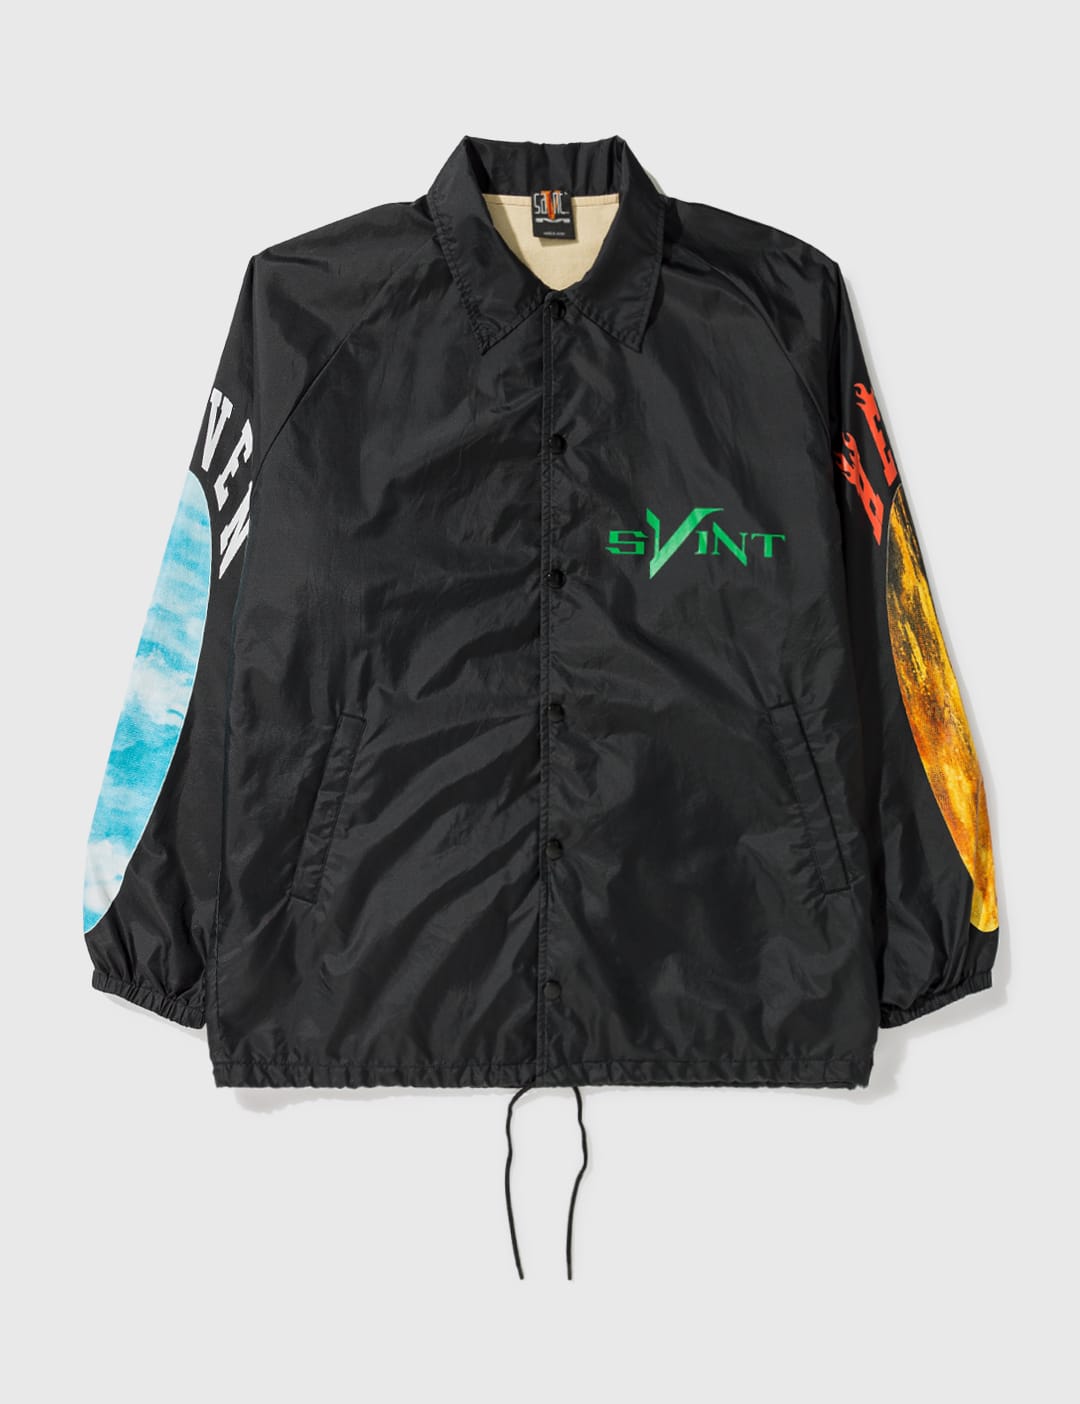 Saint Michael - SAINT MICHAEL x VLONE Skull Coach Jacket | HBX - Globally  Curated Fashion and Lifestyle by Hypebeast